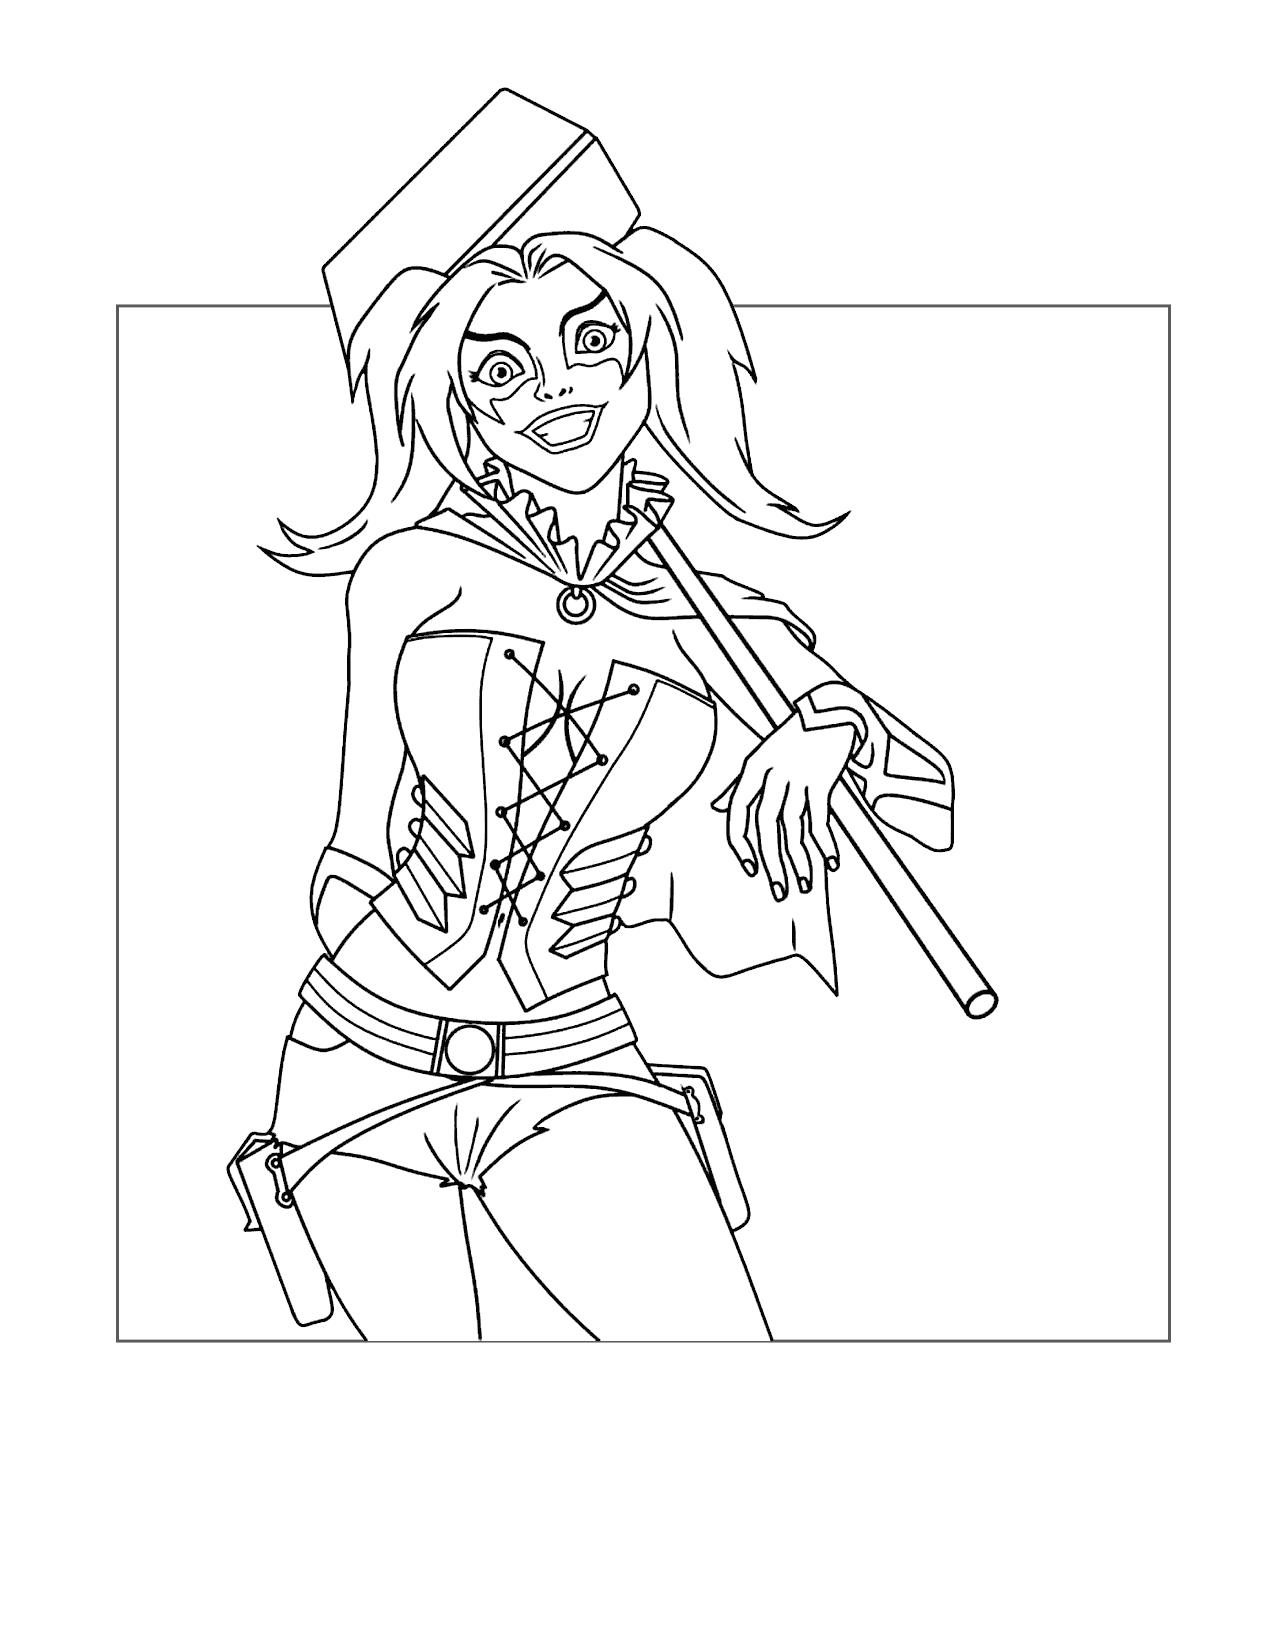 Harley Quinn Sledge Hammer Coloring Page